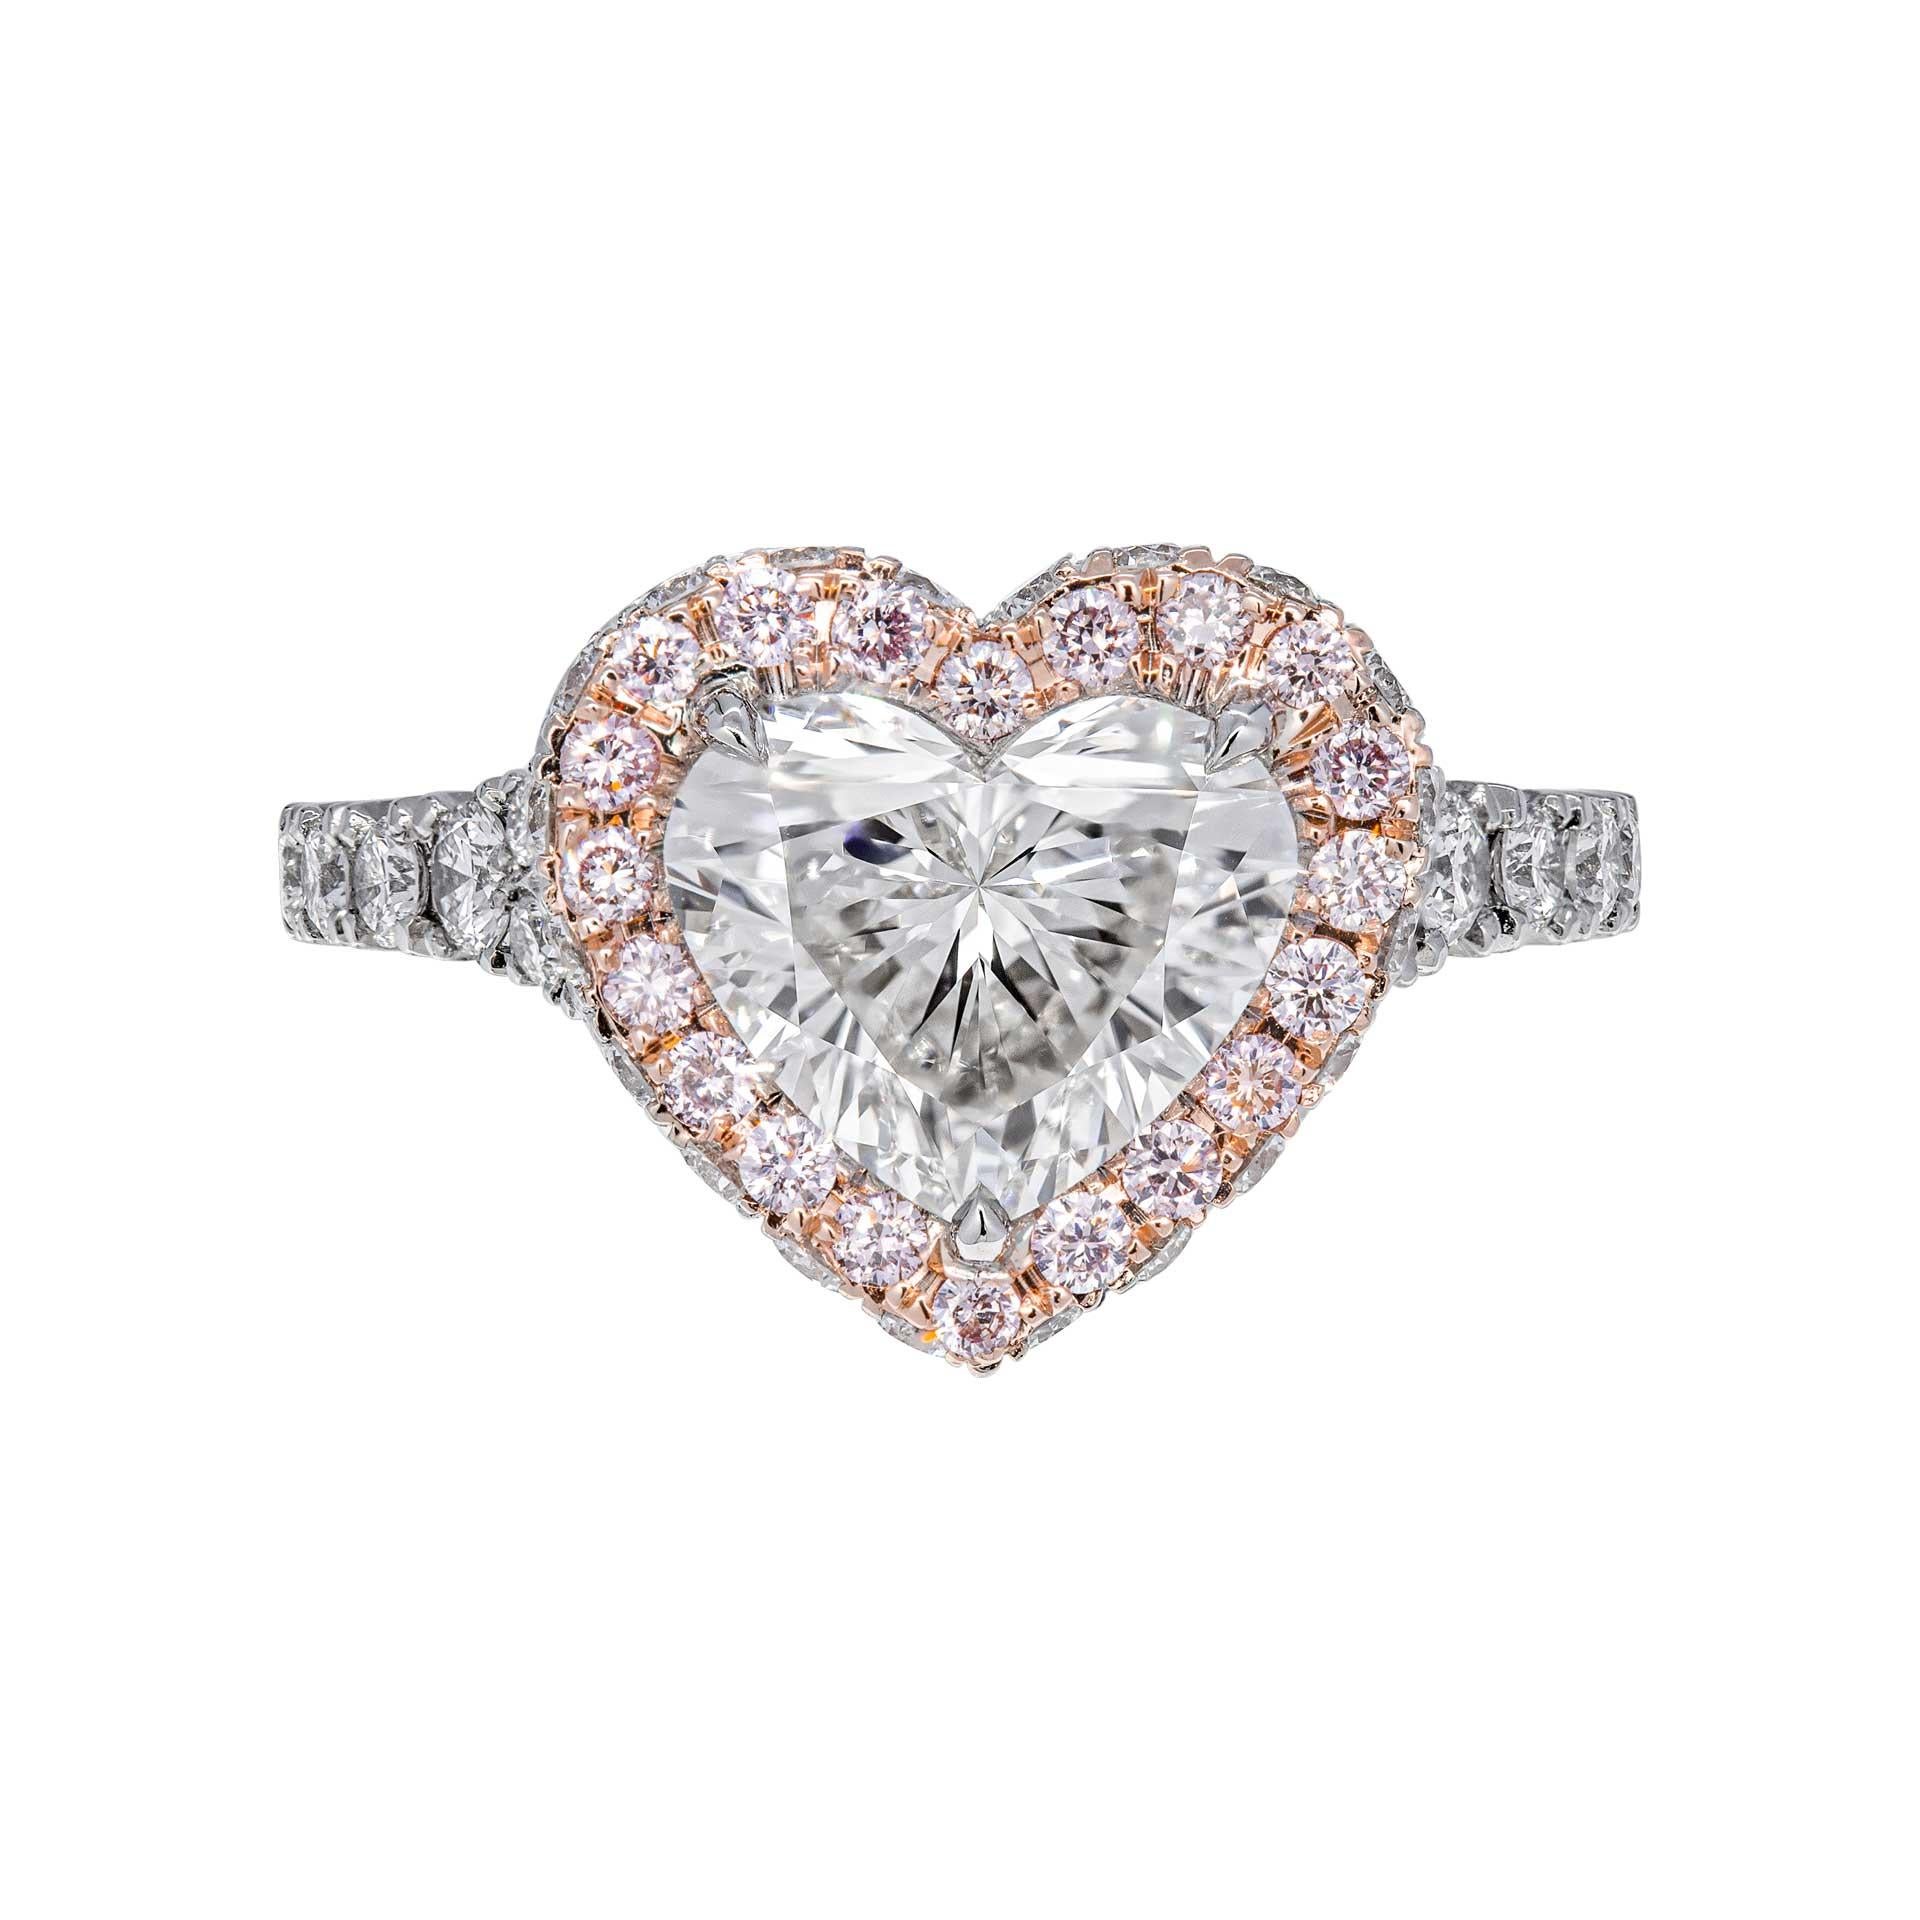 Trendy yet Timeless Heart ShapevDiamond Engagement -  classic with a modern spin
Mounted in Platinum and 18K Rose Gold, featuring exceptional pave work that compliments the center stone,
Mounting features halo with natural pink diamonds around